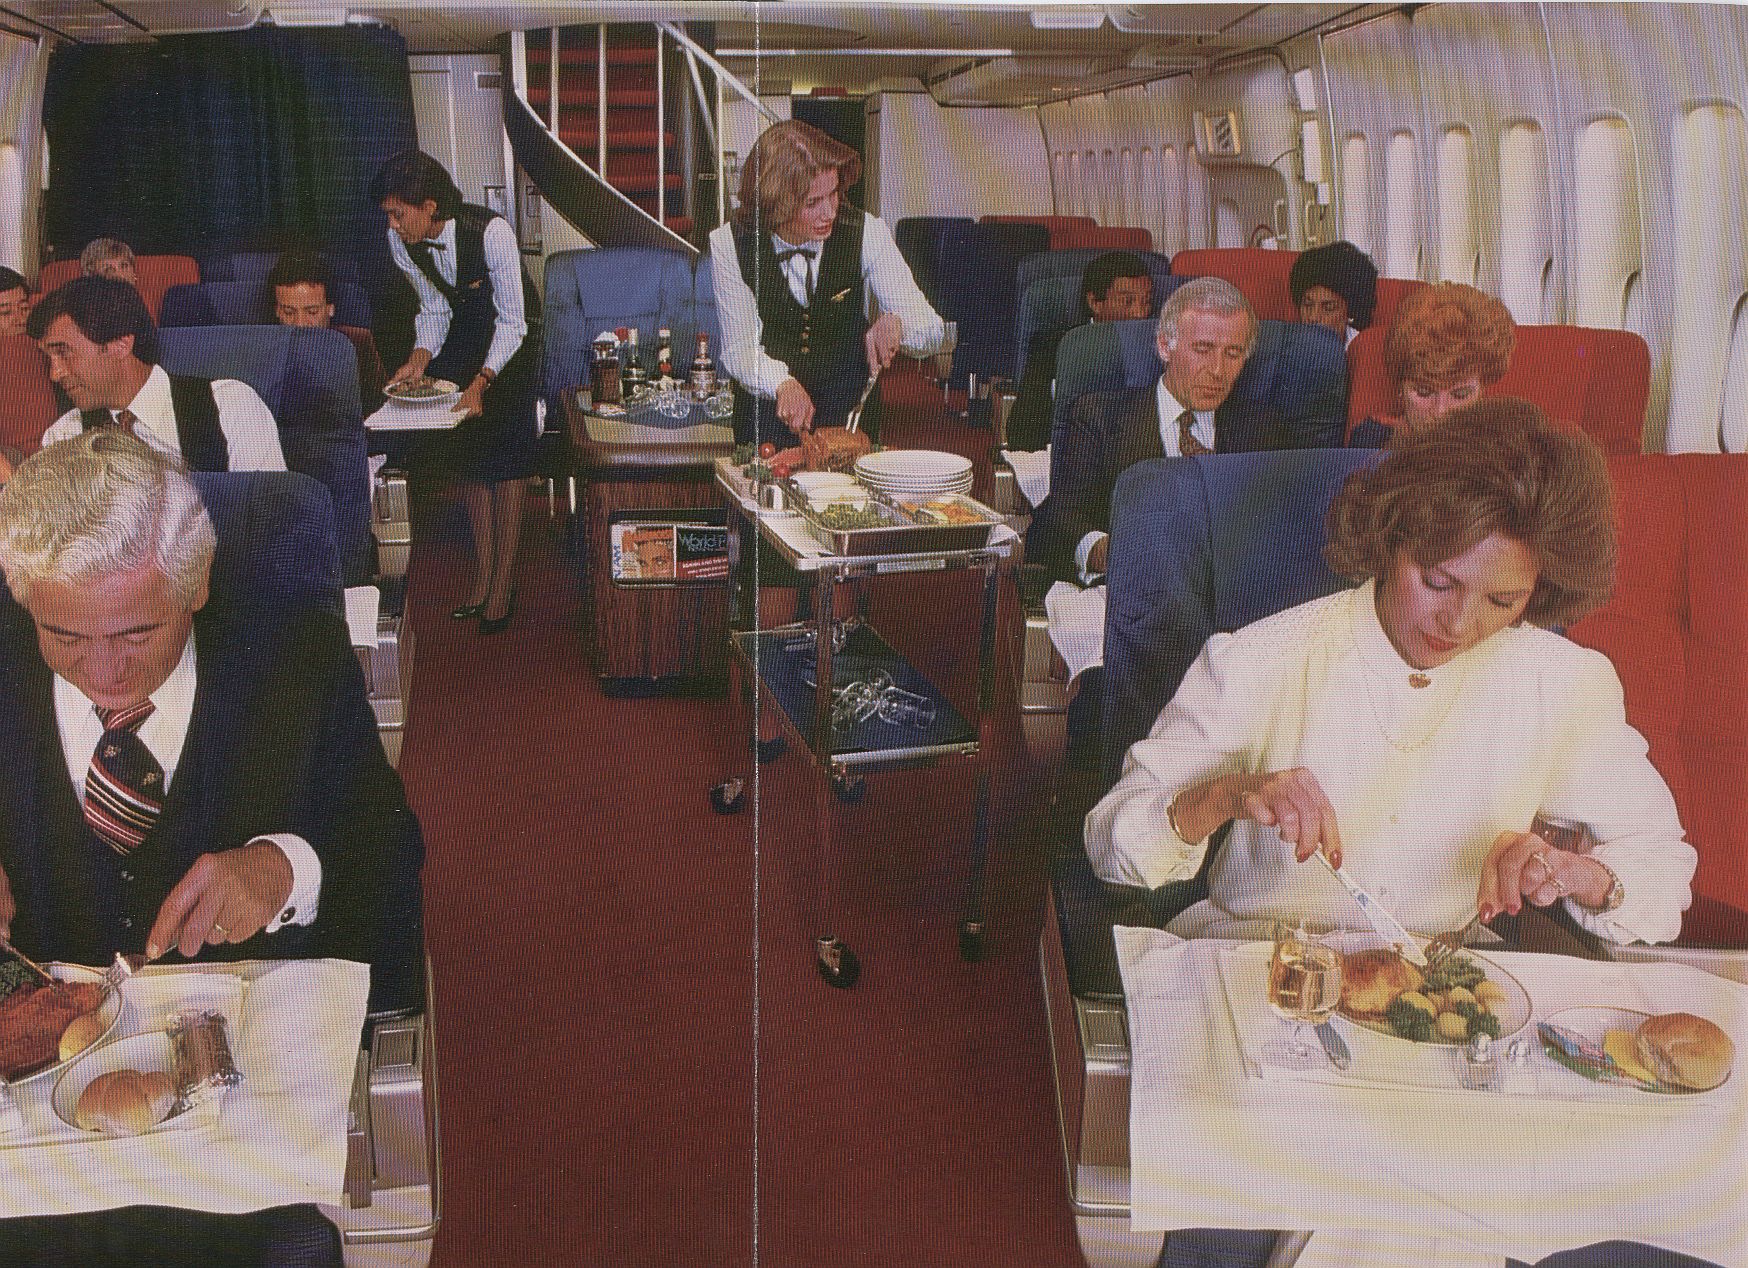 1983 A Boeing 747 First Class cabin during an elaborate meal service that included a roast cart at the customer's seat.